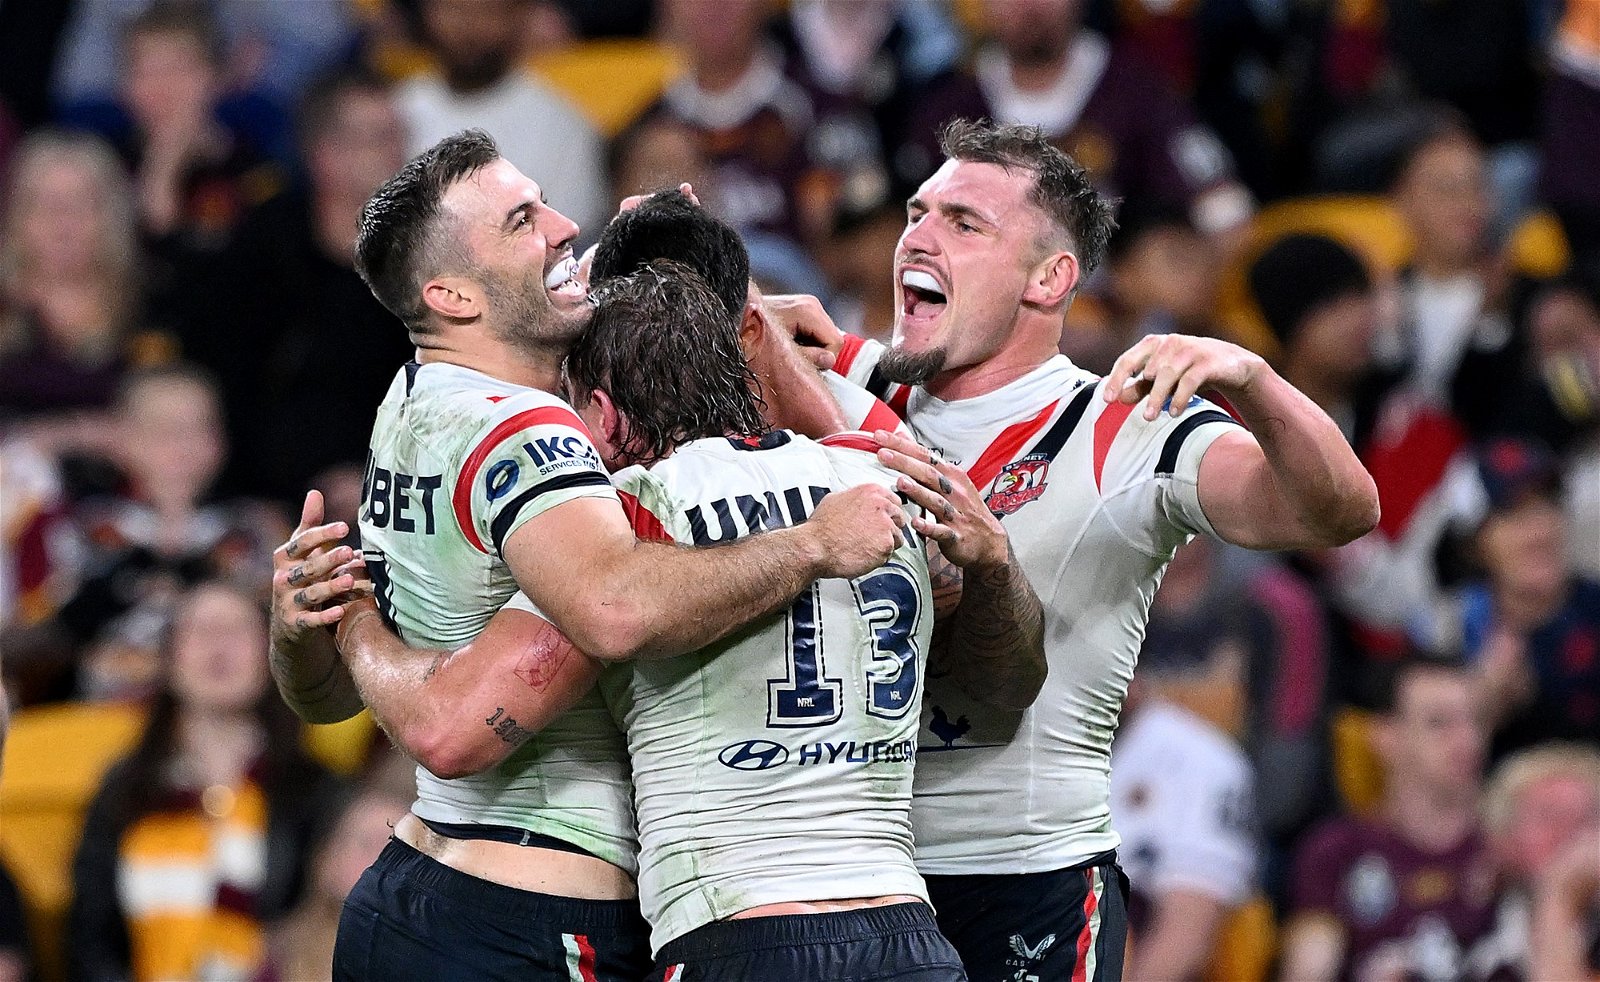 Roosters players hug after a try in an NRL game.